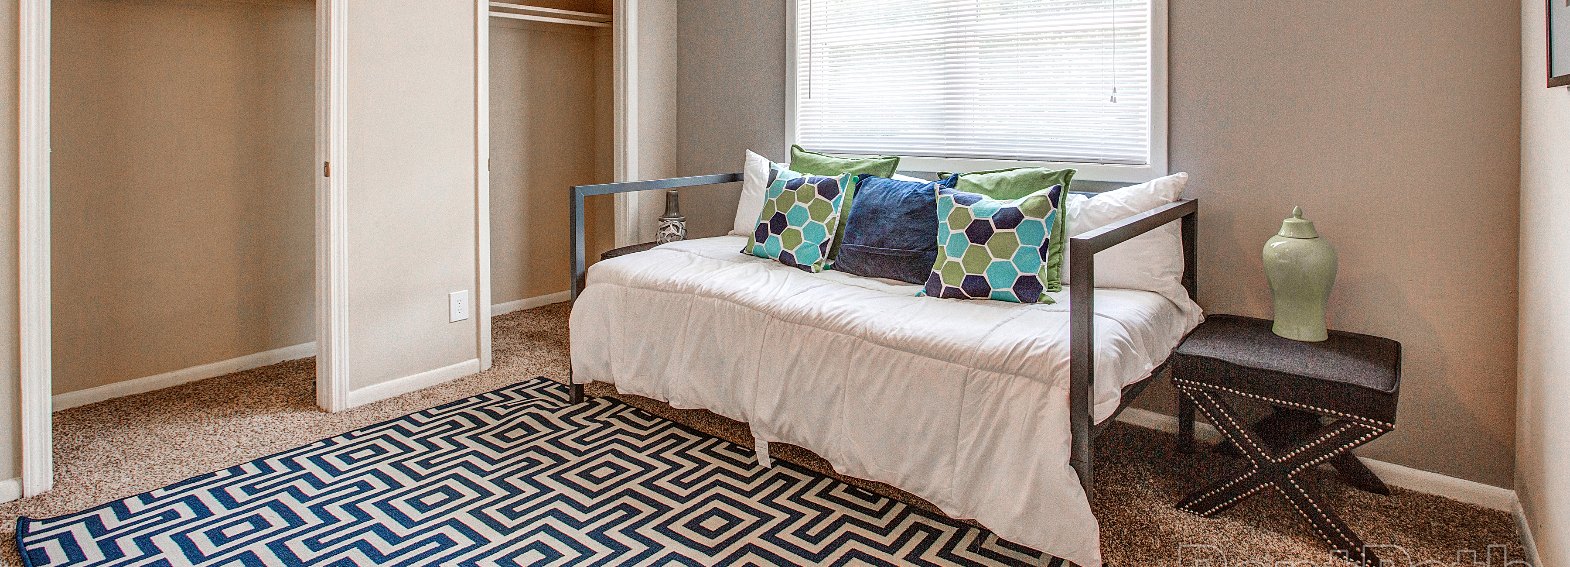 Upland Townhomes bedroom